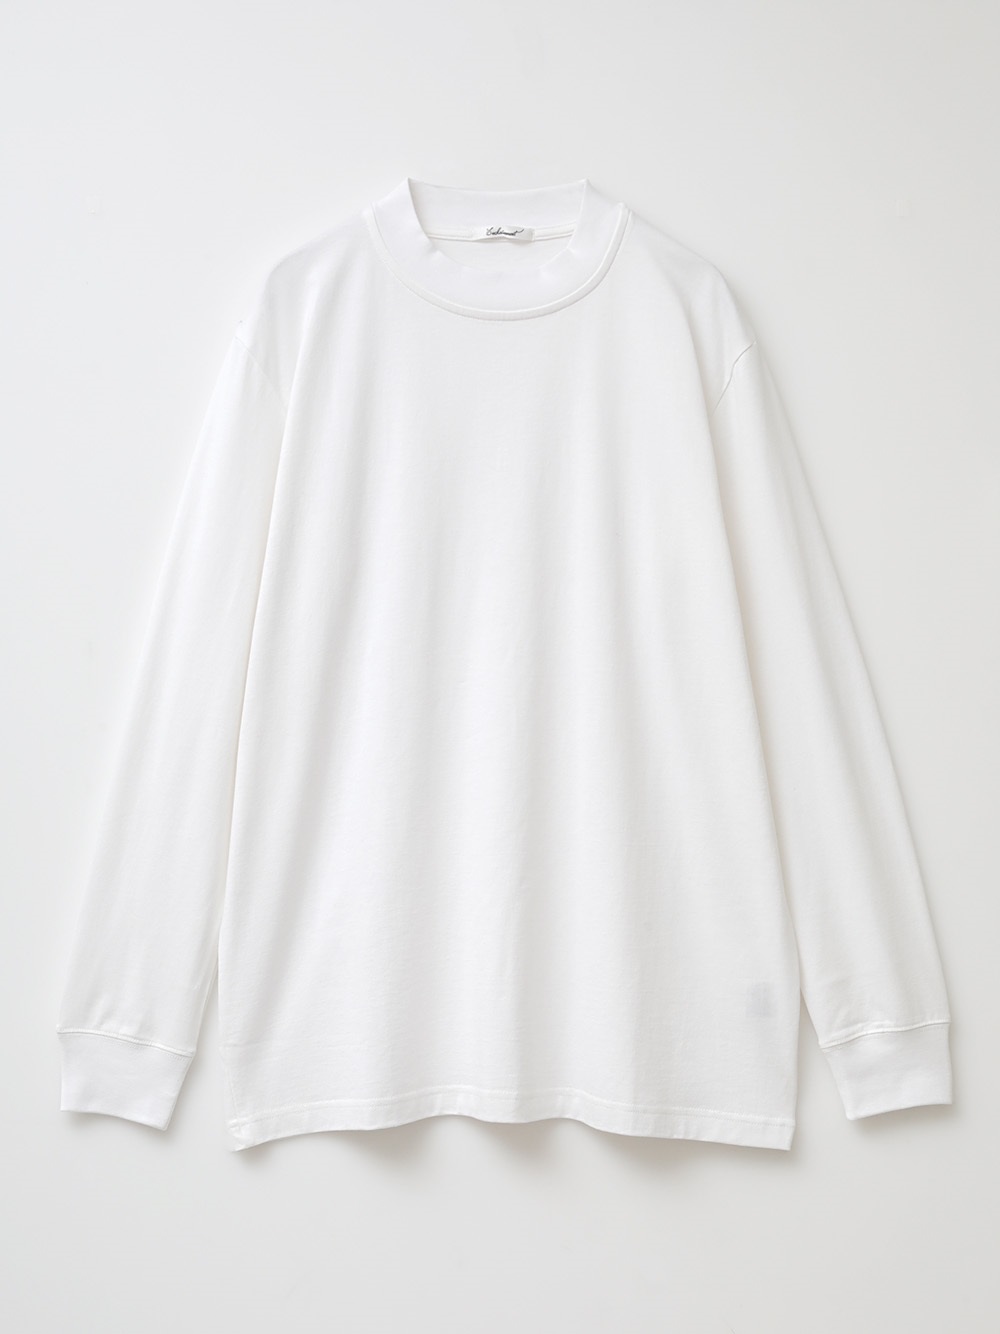 High neck cut and sew(02ホワイト-１)